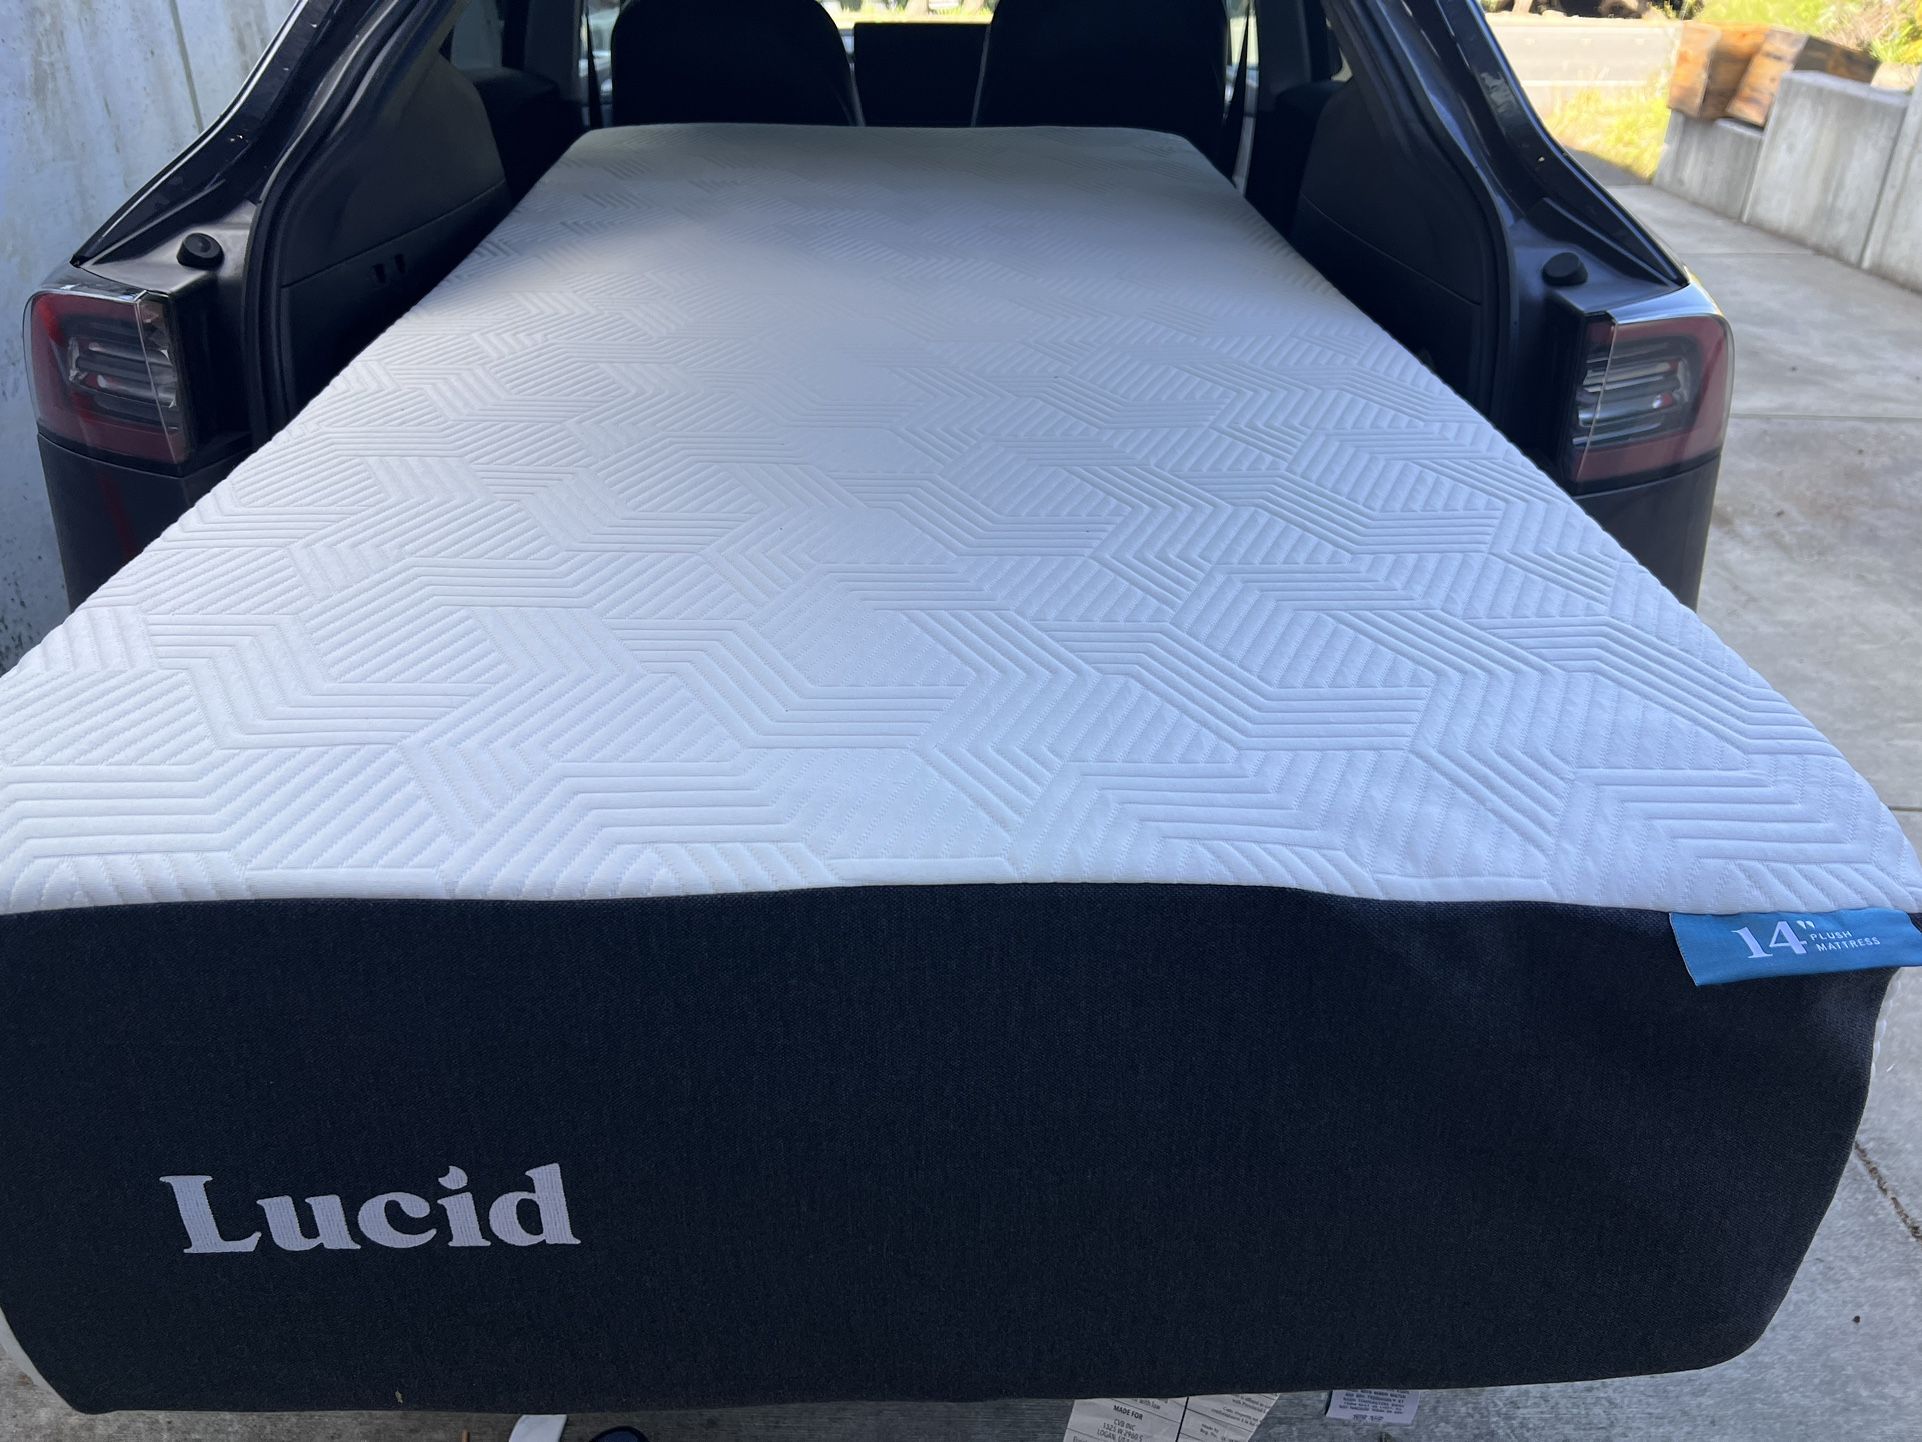 Lucid Twin Xl Mattress 14”.  One Year Old, Like New